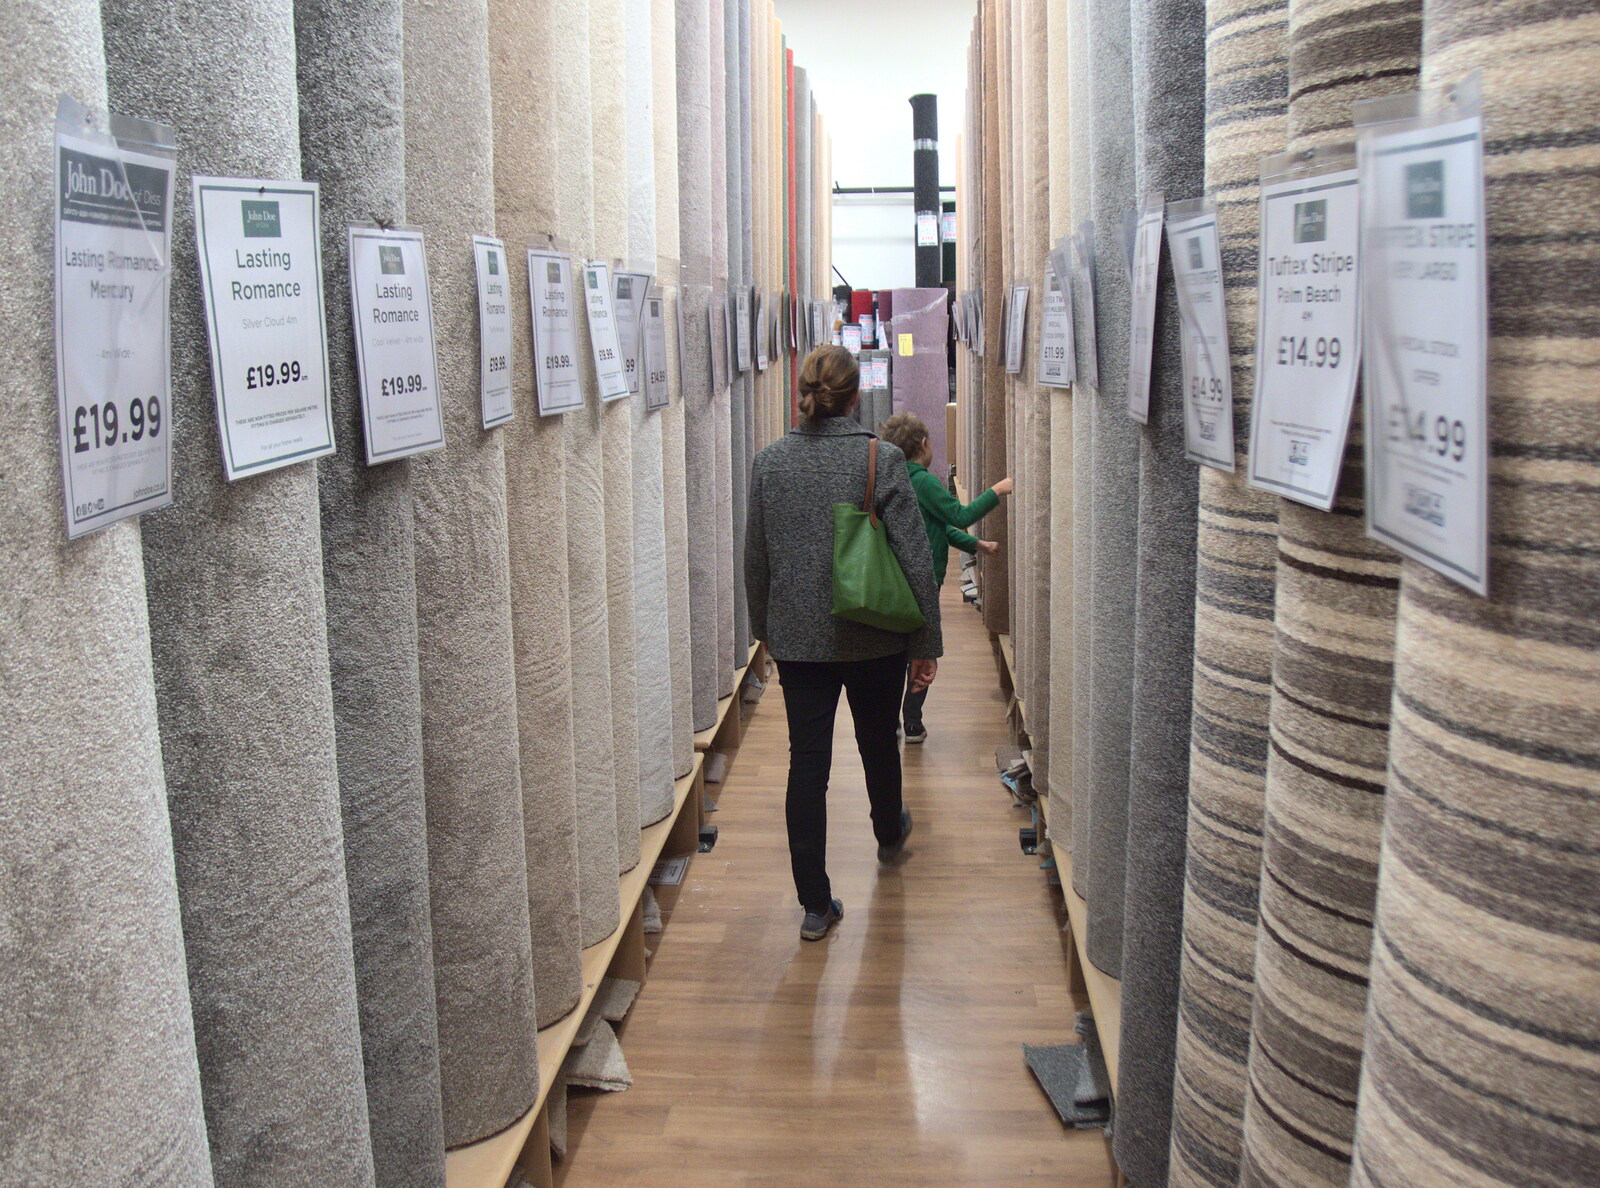 We roam around carpet rolls in Doe's of Diss from Hyde Park and Carpets, London and Diss - 20th September 2017